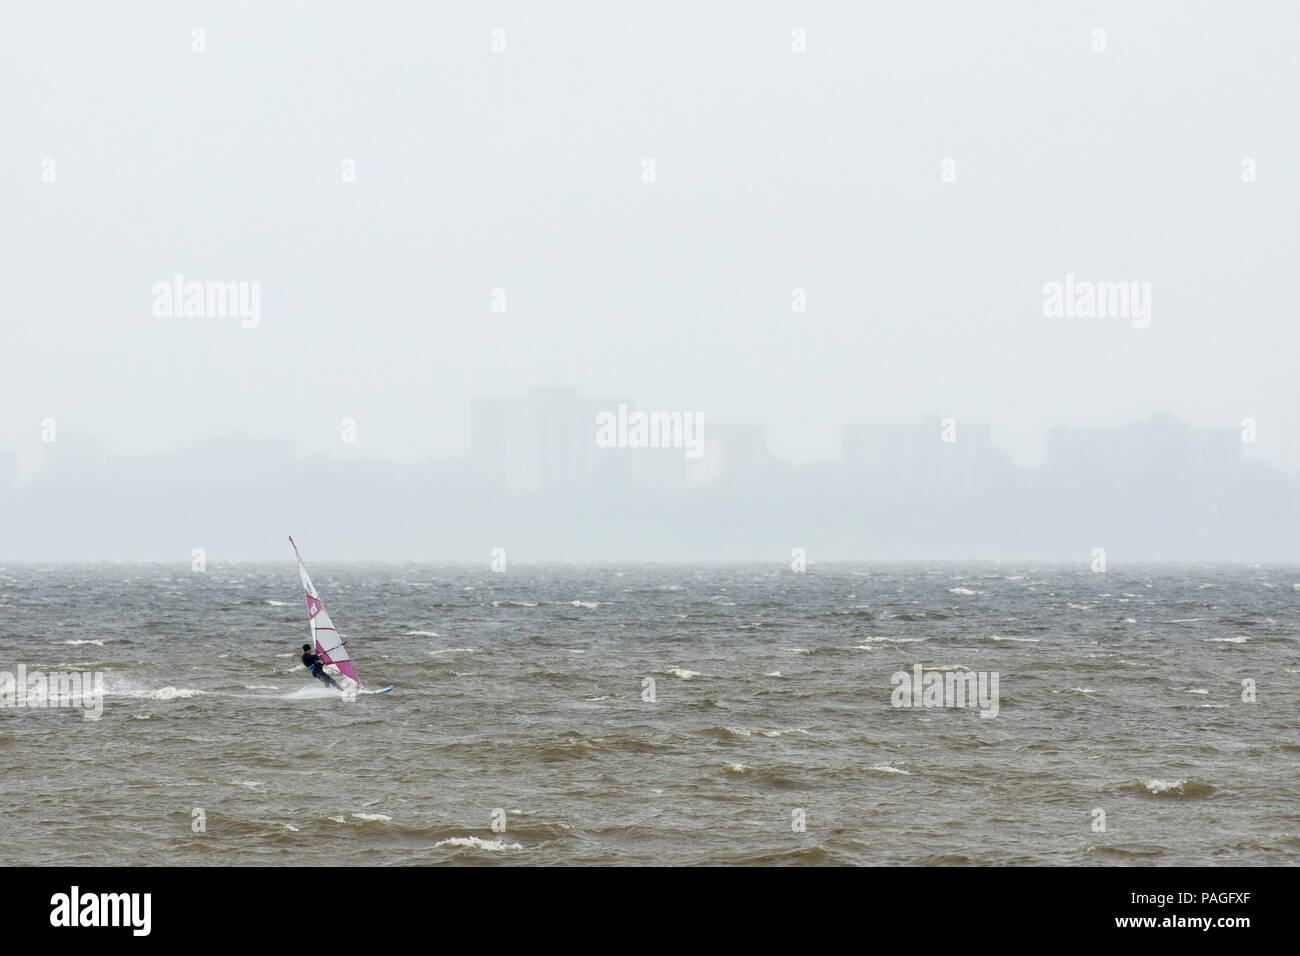 Ottawa, Canada. 22nd July, 2018.  A wind surfer on the Ottawa river as wind and rain return to the region after nearly two months of drought condition. Credit: Vince F/Alamy Live News Stock Photo